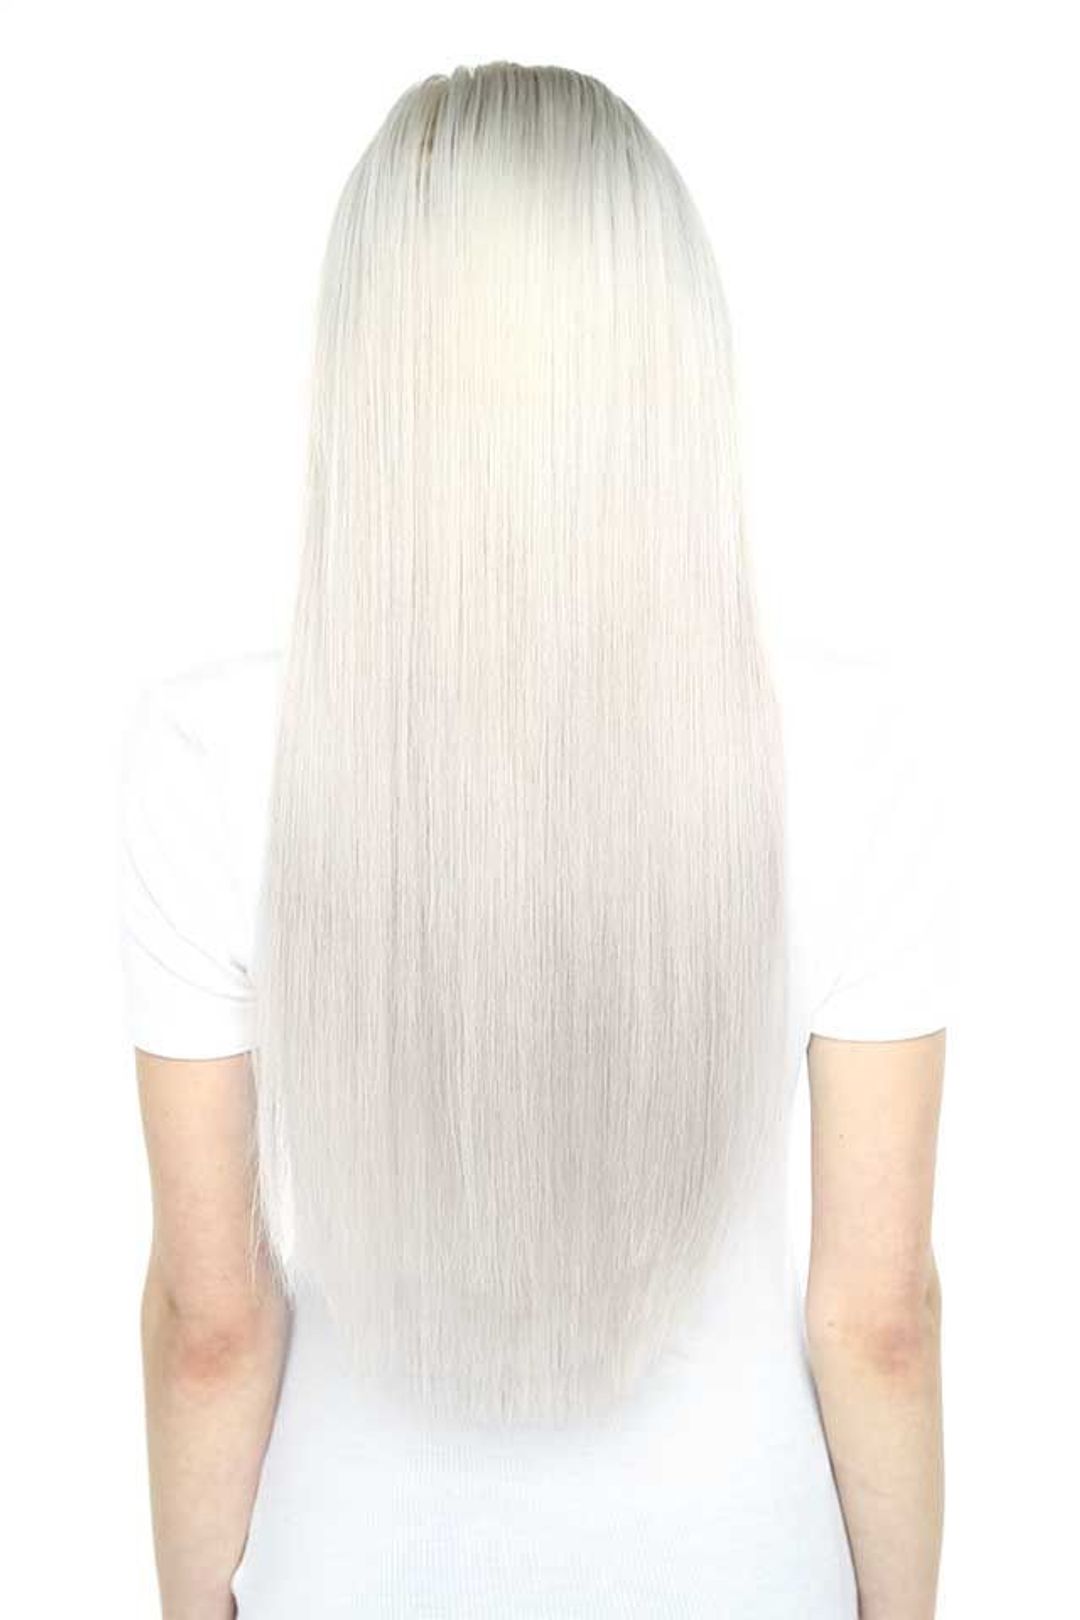 Beauty Works Celebrity Choice Weft Hair Extensions - Blondette,22"